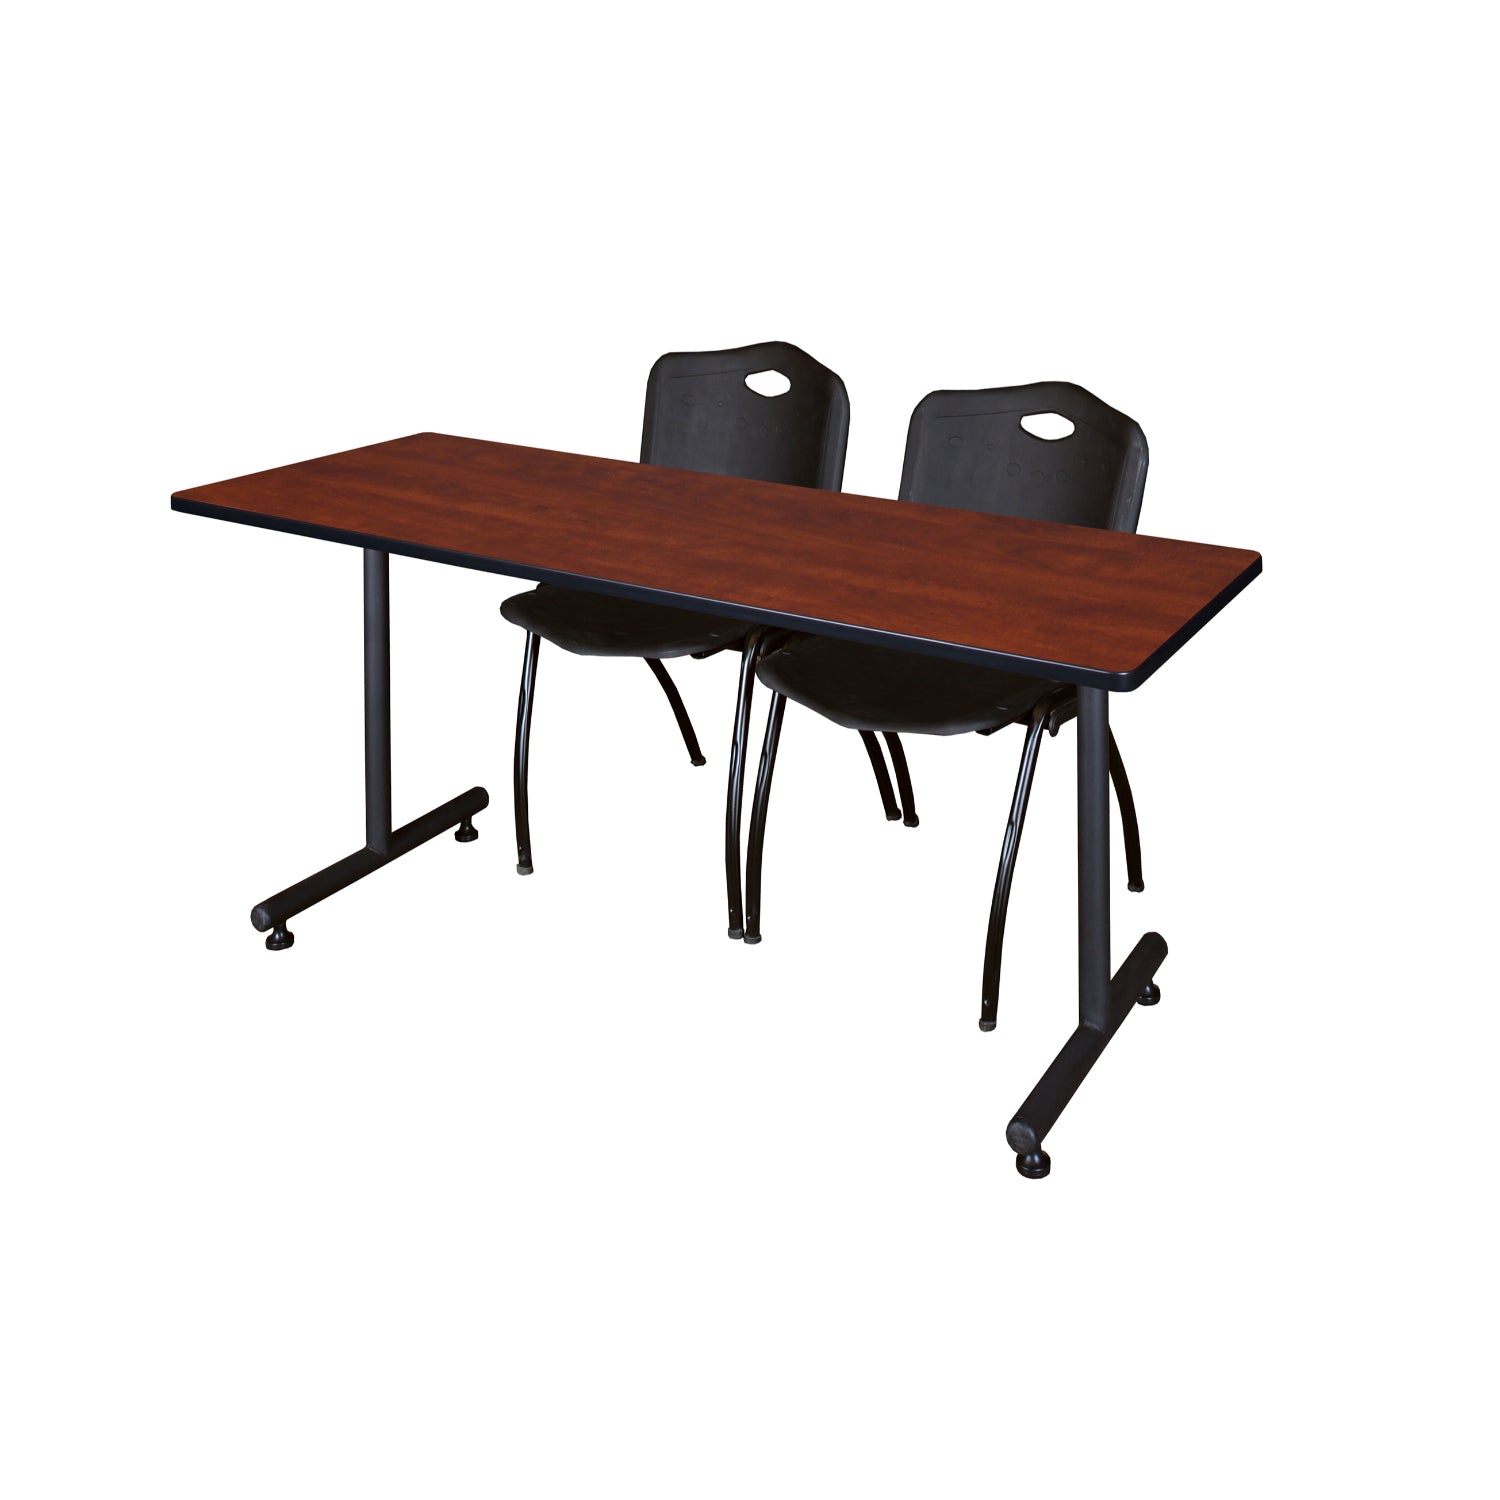 Kobe Training Table and Chair Package, Kobe 66" x 30" T-Base Training/Seminar Table with 2 "M" Stack Chairs